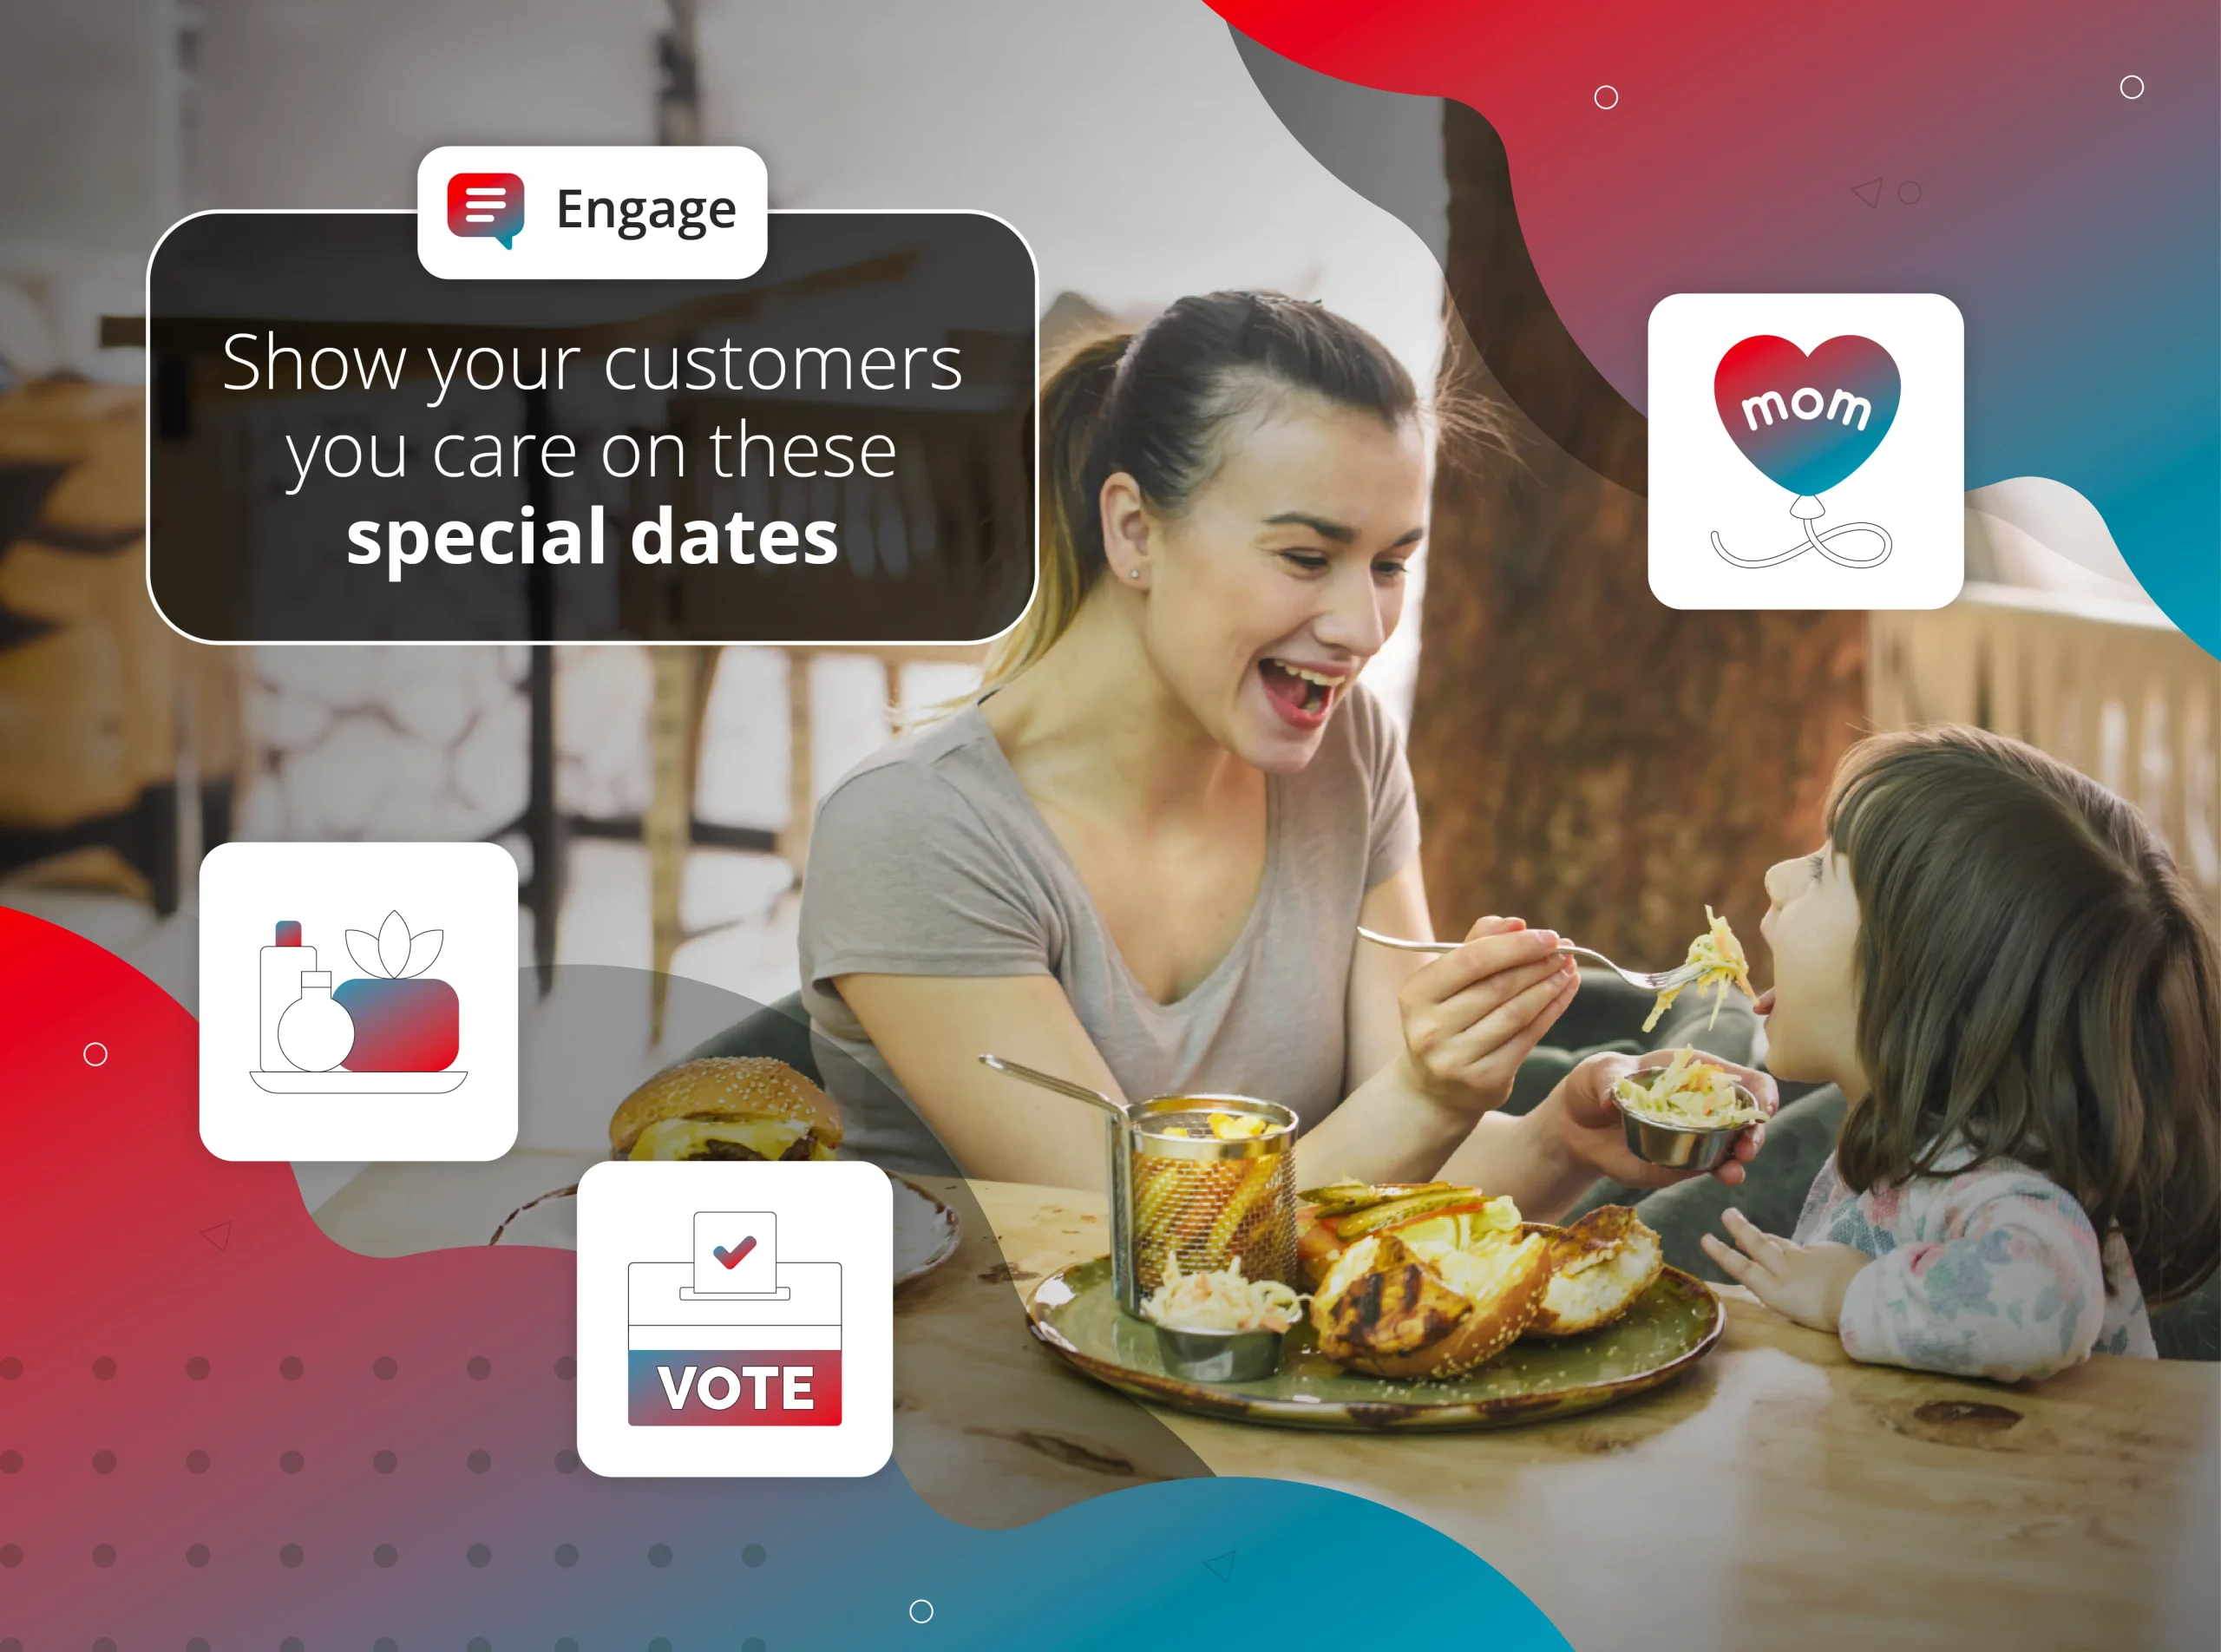 Show your customers you care on these special dates